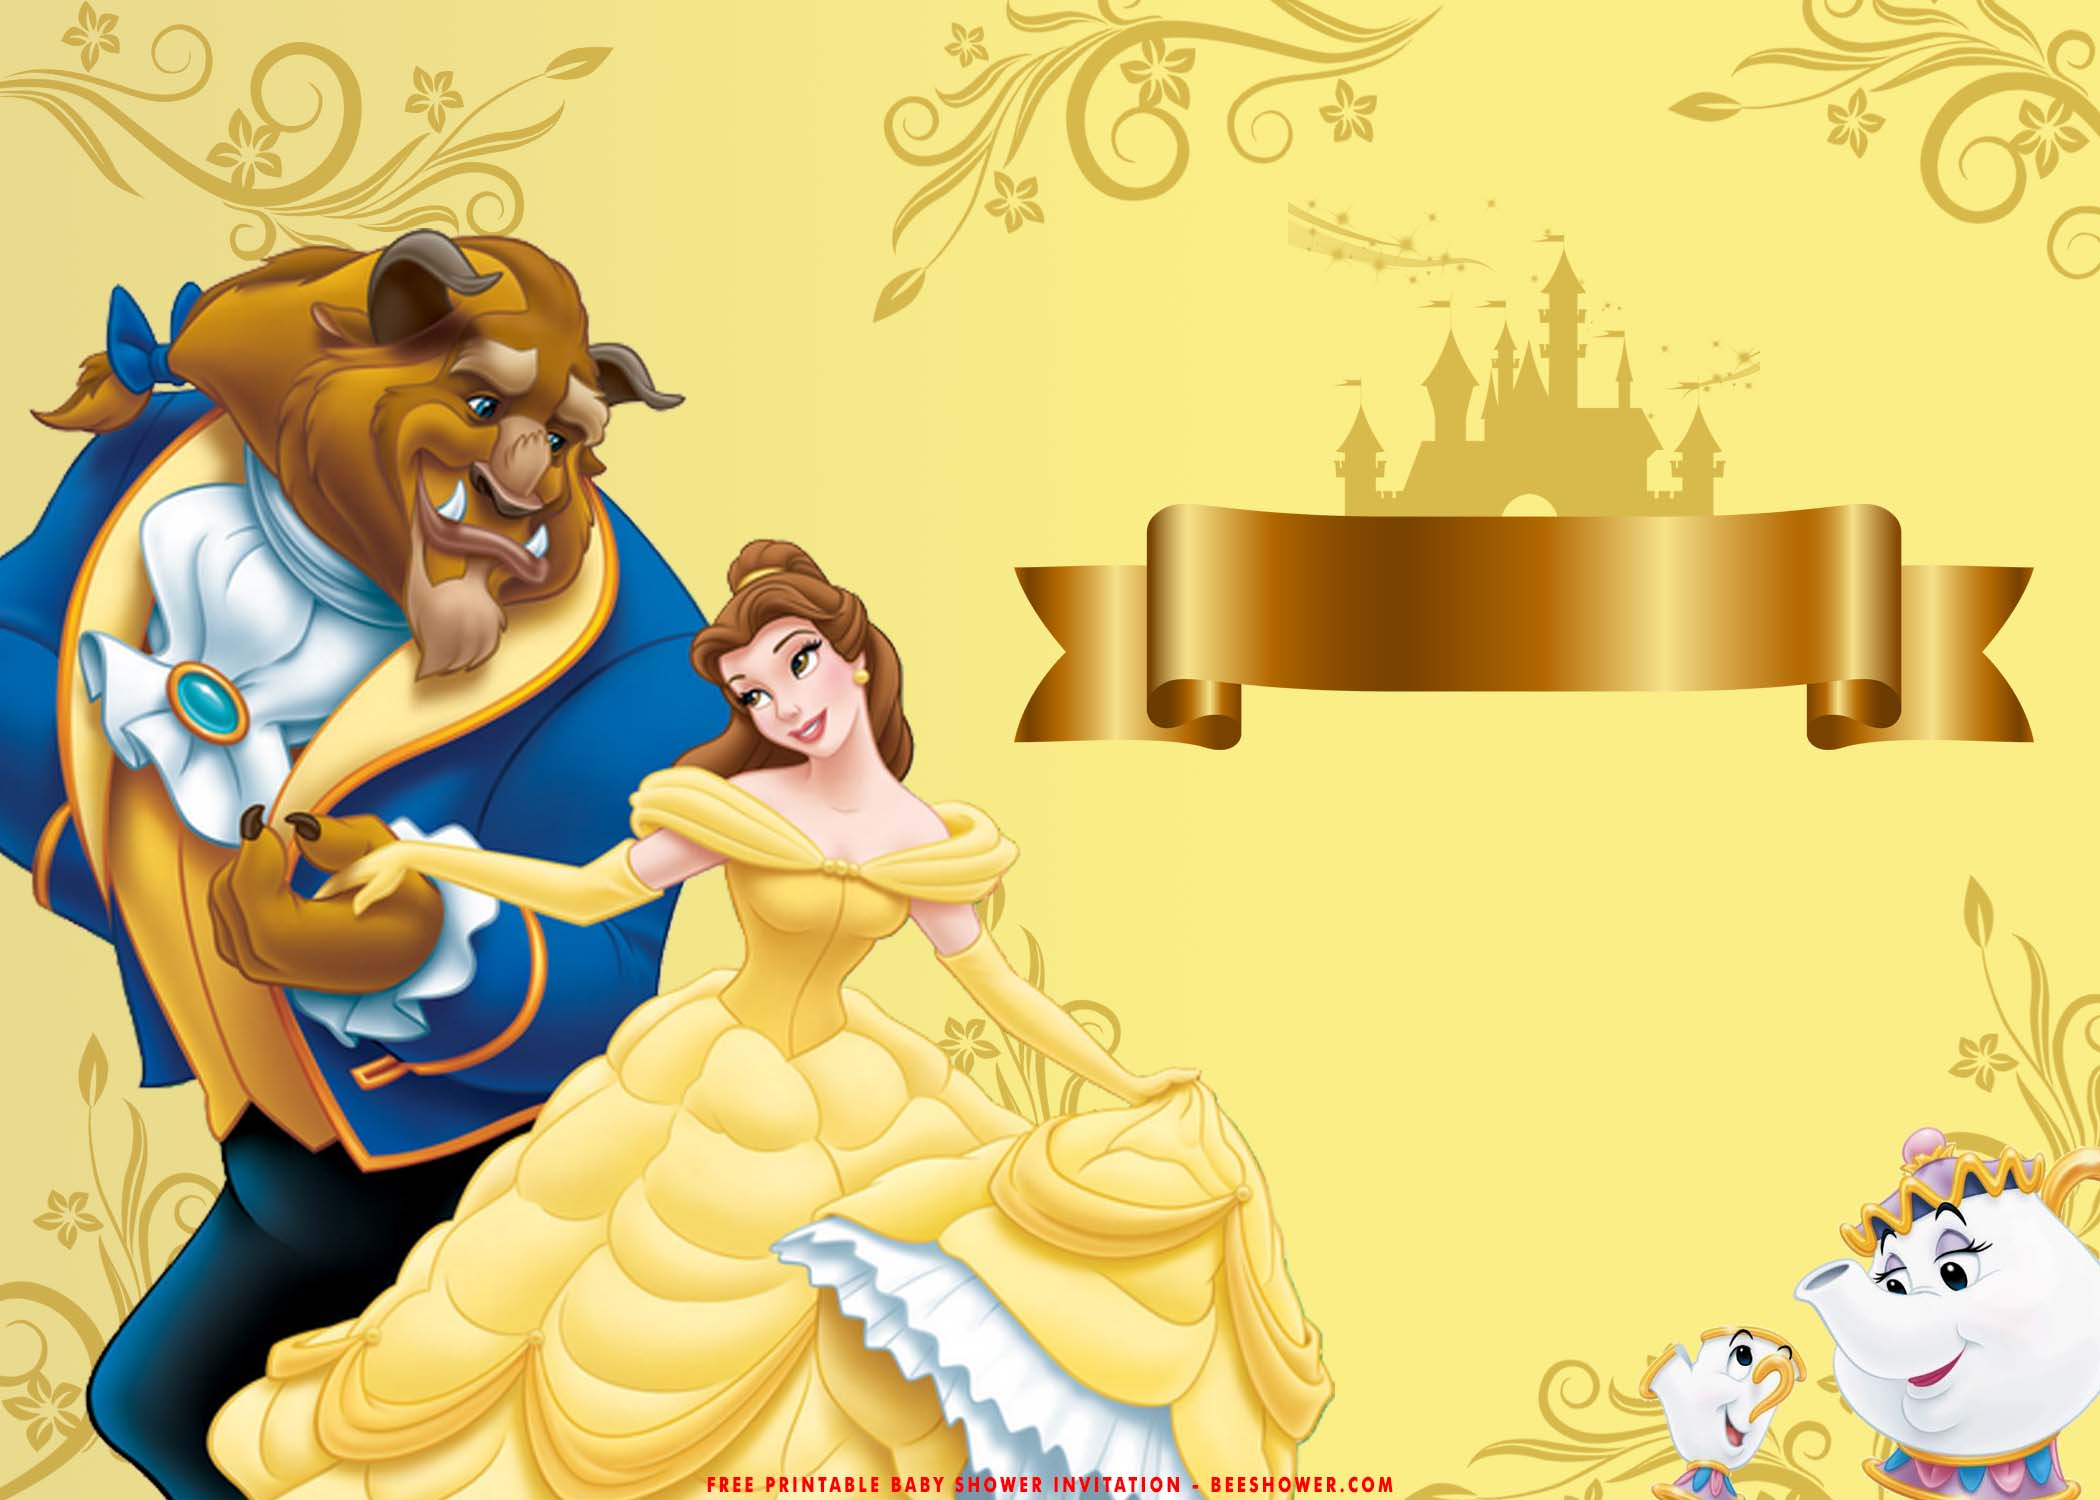  FREE Printable Romantic Beauty And The Beast Baby Shower Templates 